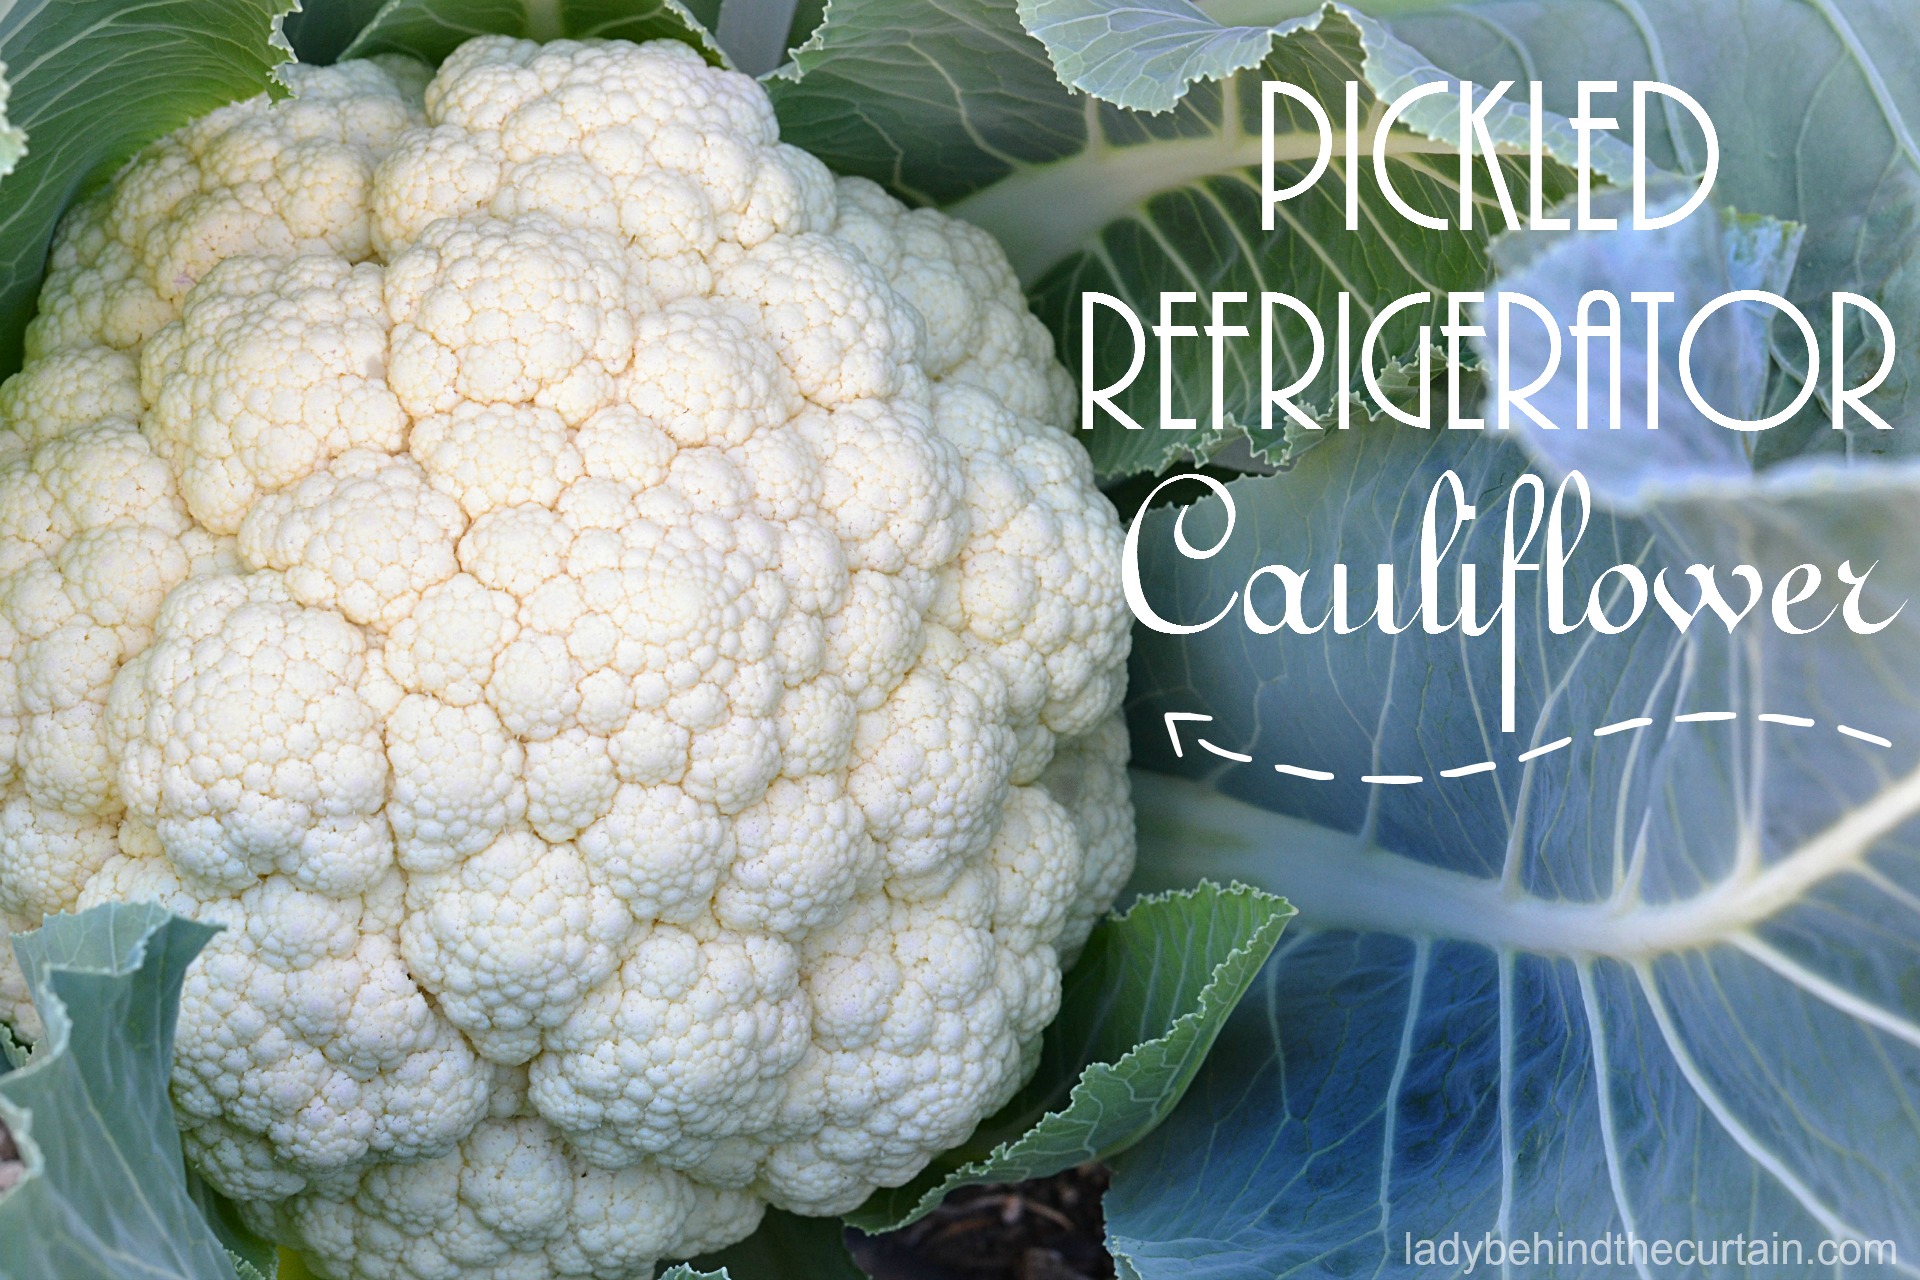 Pickled Refrigerator Cauliflower | rustic party favor, relish dish, salad, game day recipe